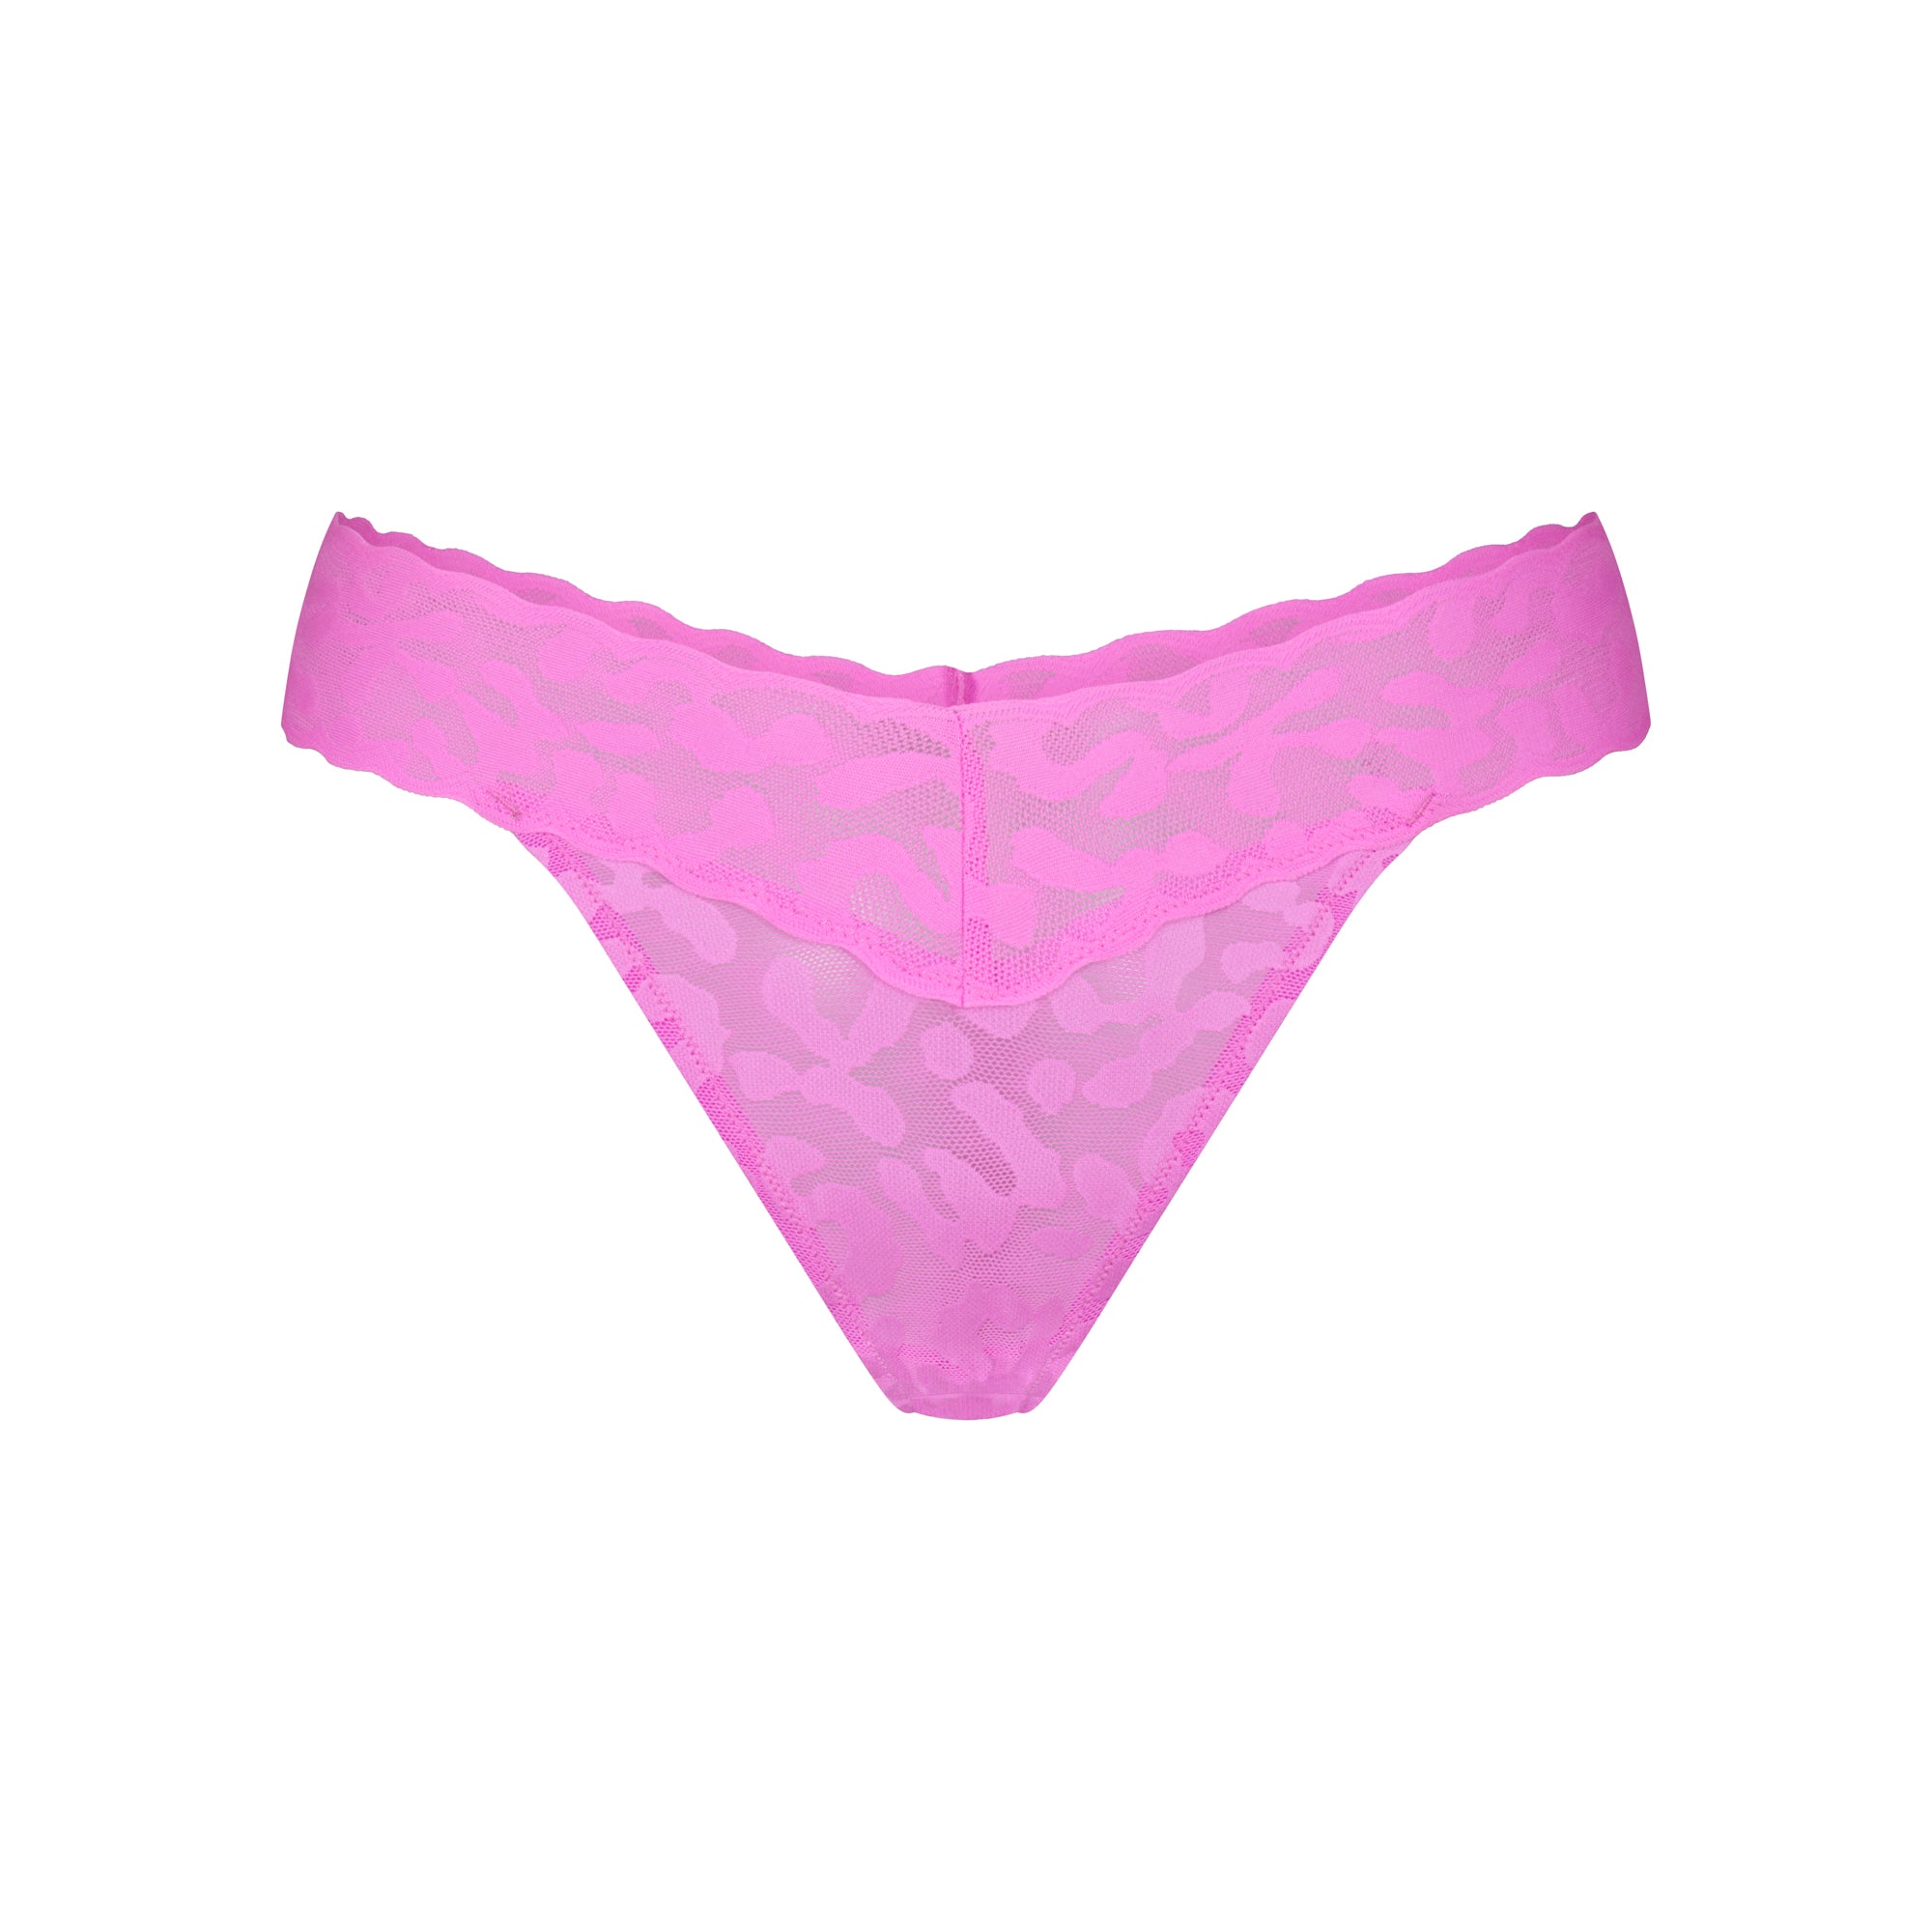 SKIMS - Venezia wears a size 2X in the Mesh Built Up Thong ($22 in